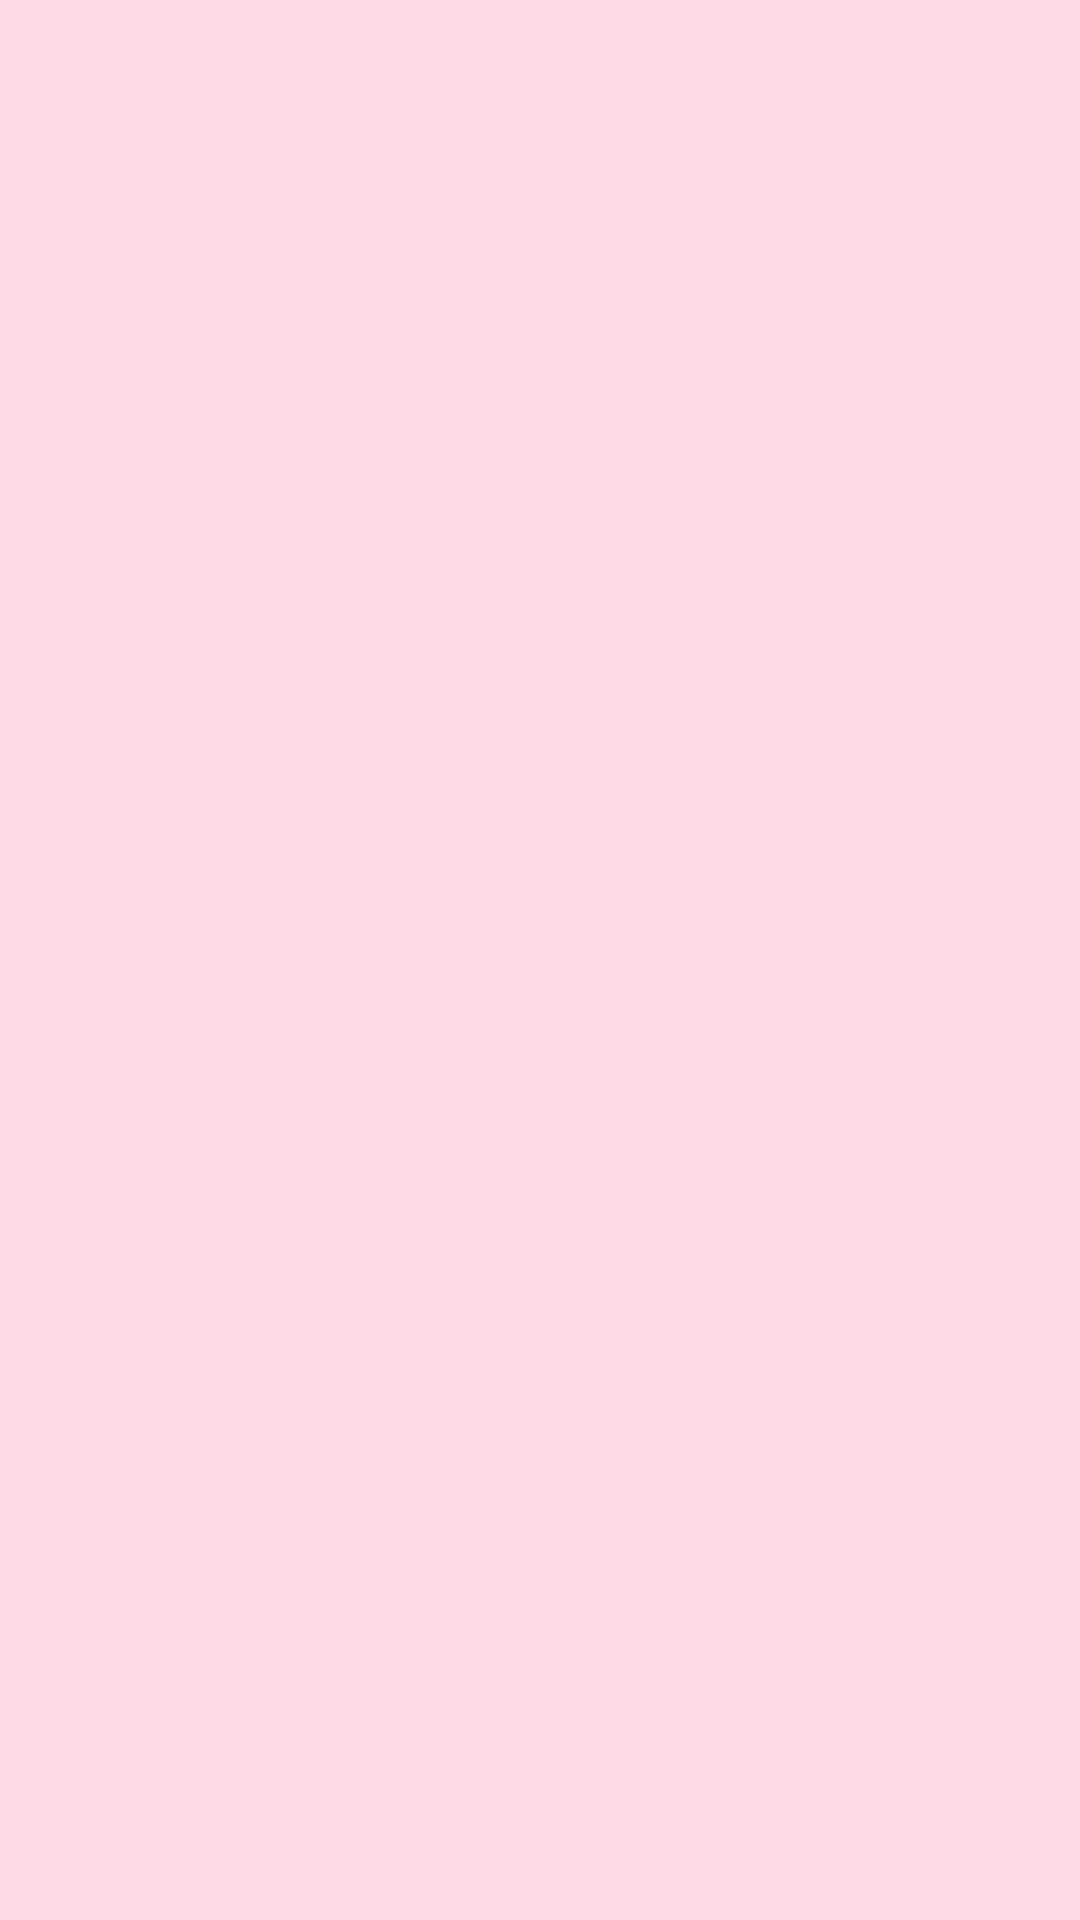 A minimalistic image with a simple addition of pink color. Wallpaper